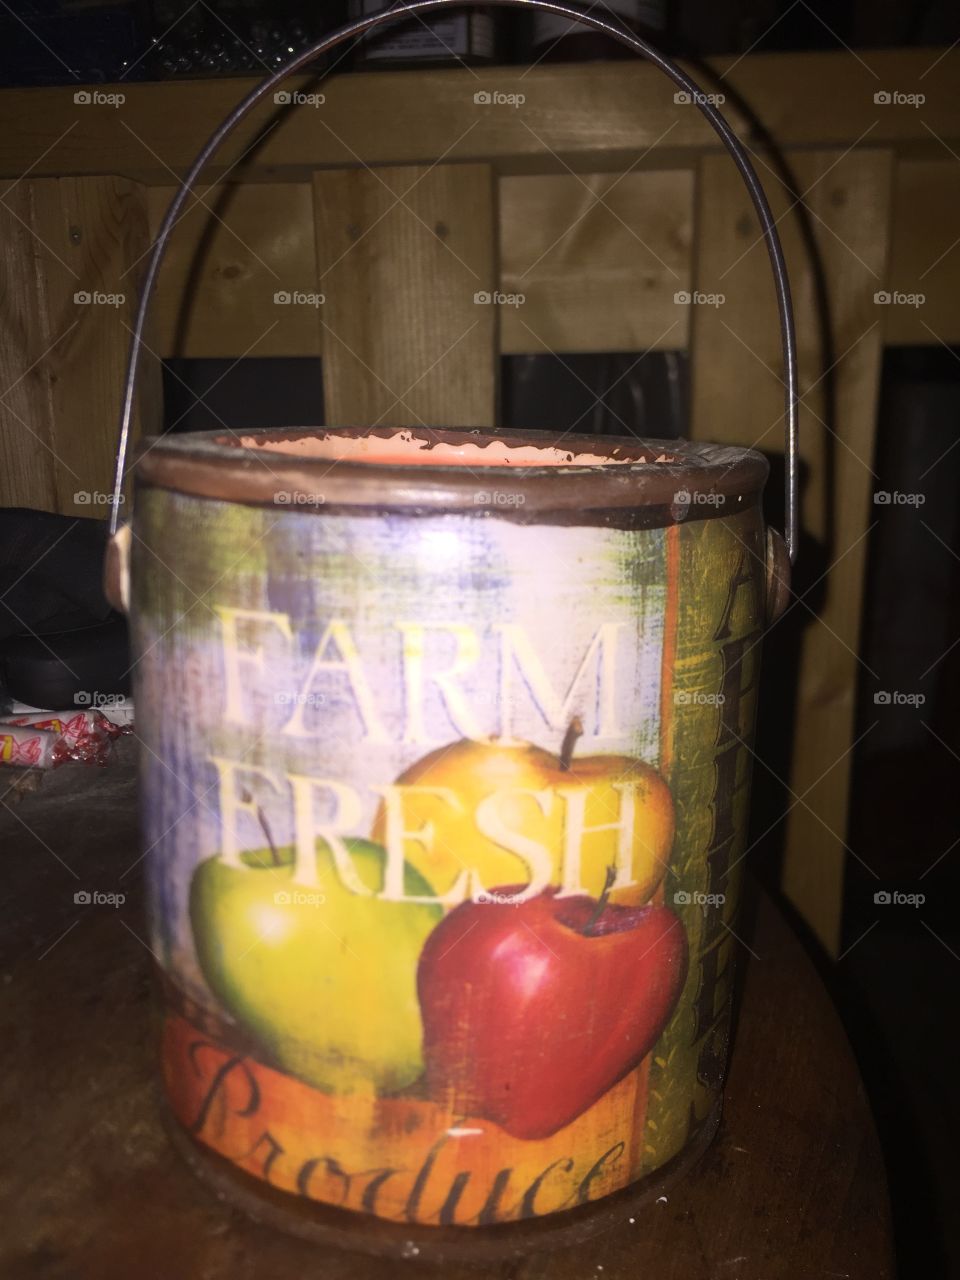 An interesting candle holder in a little tin bucket